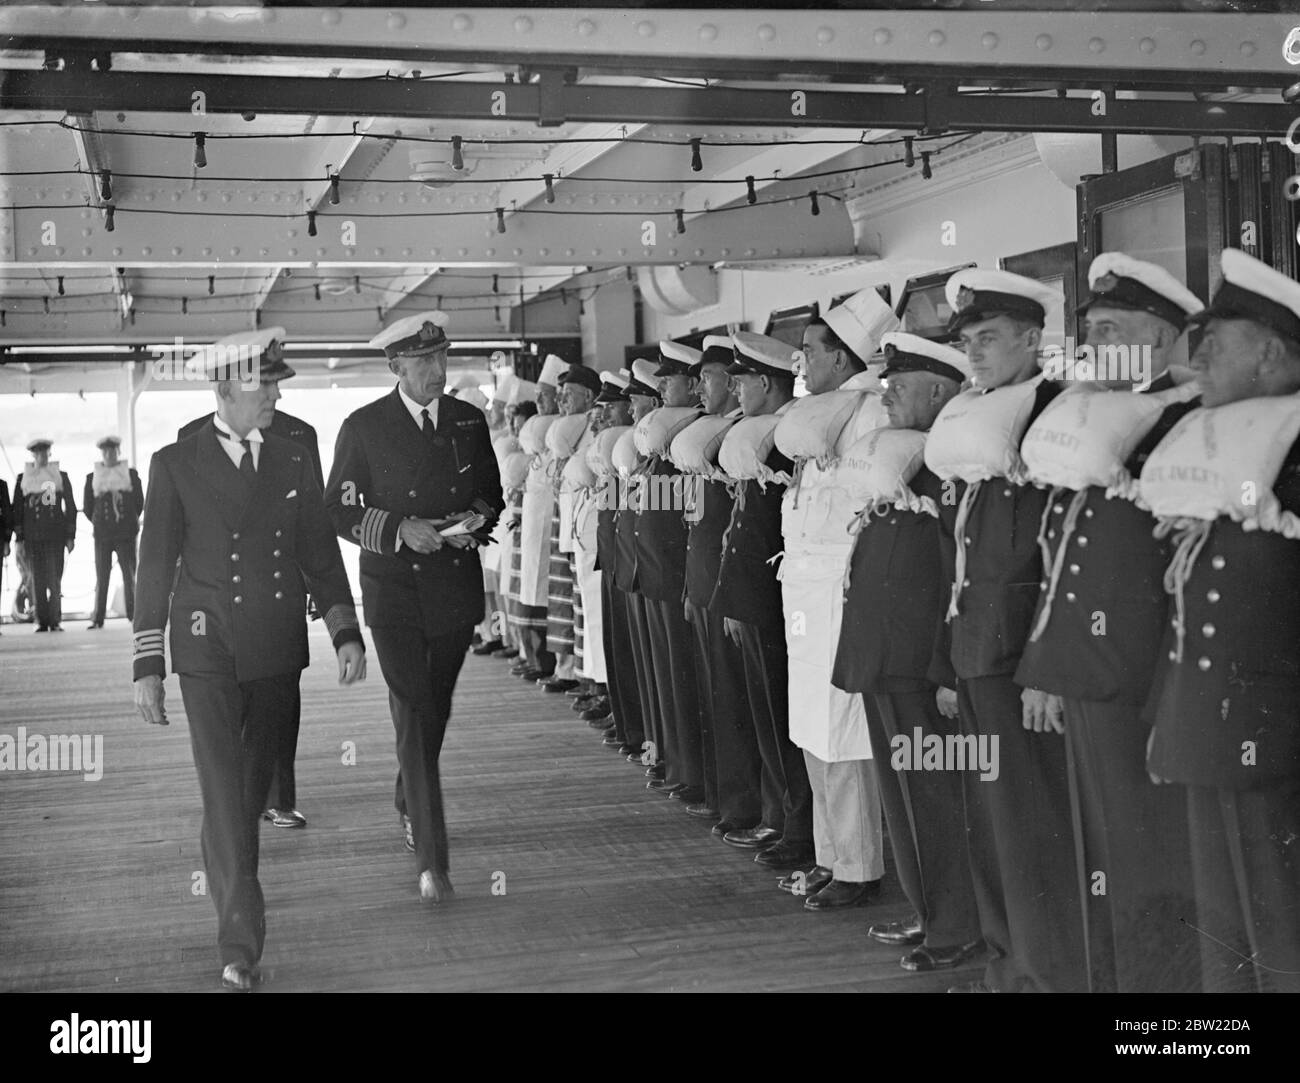 Commander Hughes, of the embarkation staff, made an official inspection of the crew and watch lifeboat in firefighting drills on the new troopship Dunera which leaves Southampton on her maiden voyage tomorrow with troops for China. 6 September 1937. Stock Photo